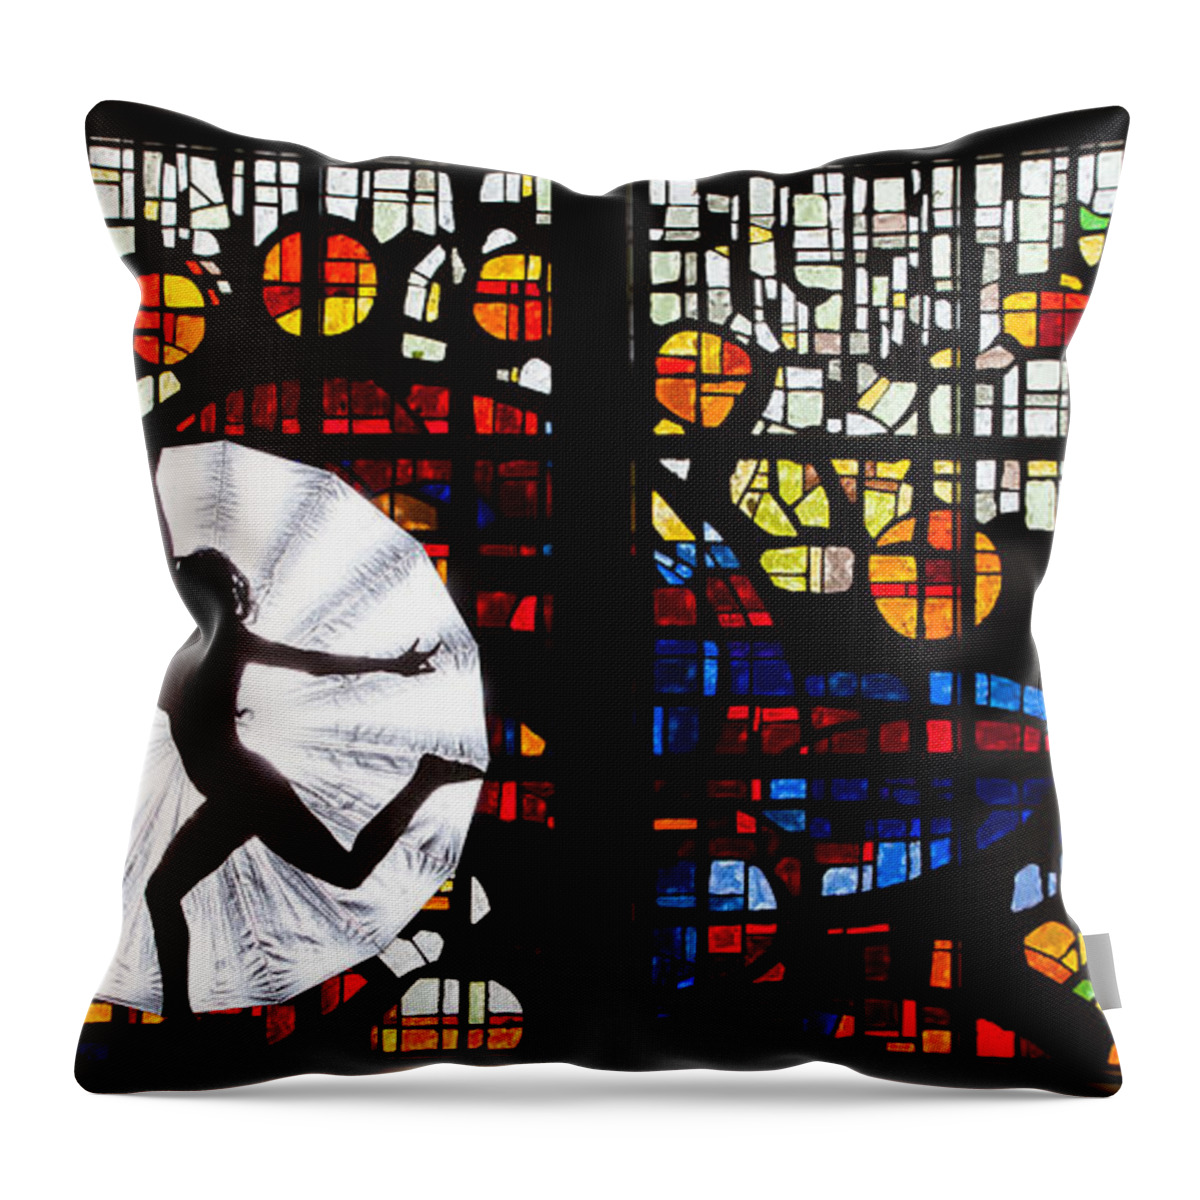 Silhouettes Throw Pillow featuring the photograph Silhouette 321 by Michael Fryd